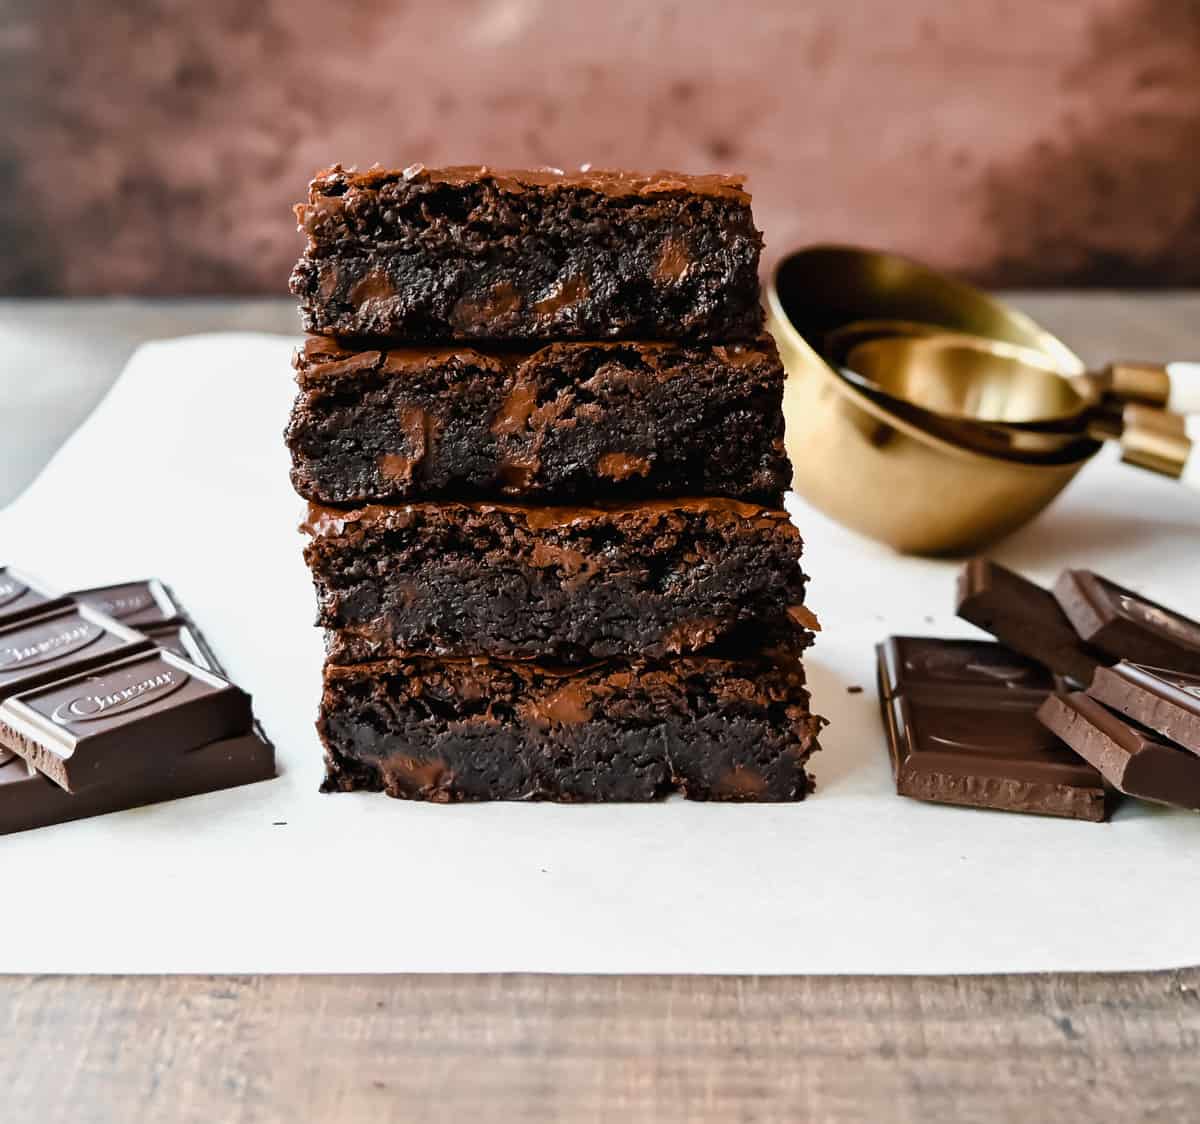 Brown Butter Brownies. The most fudgy, chewy chocolate brownies made with brown butter to make them even better! Everyone always asks for this easy homemade brownie recipe.